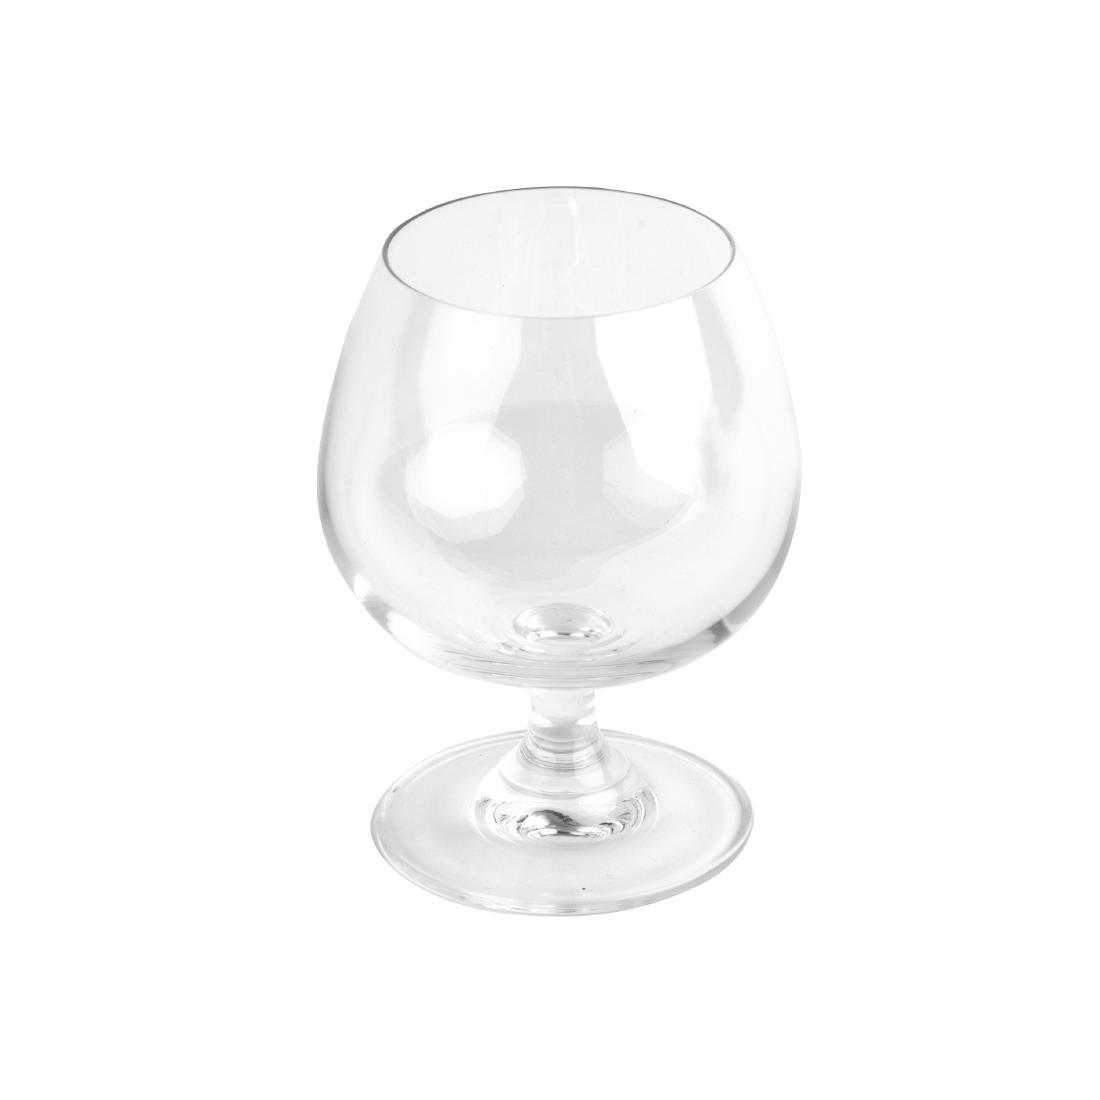 GF739 - G019.1914 - Olympia Bar Collection Crystal Brandy Glasses